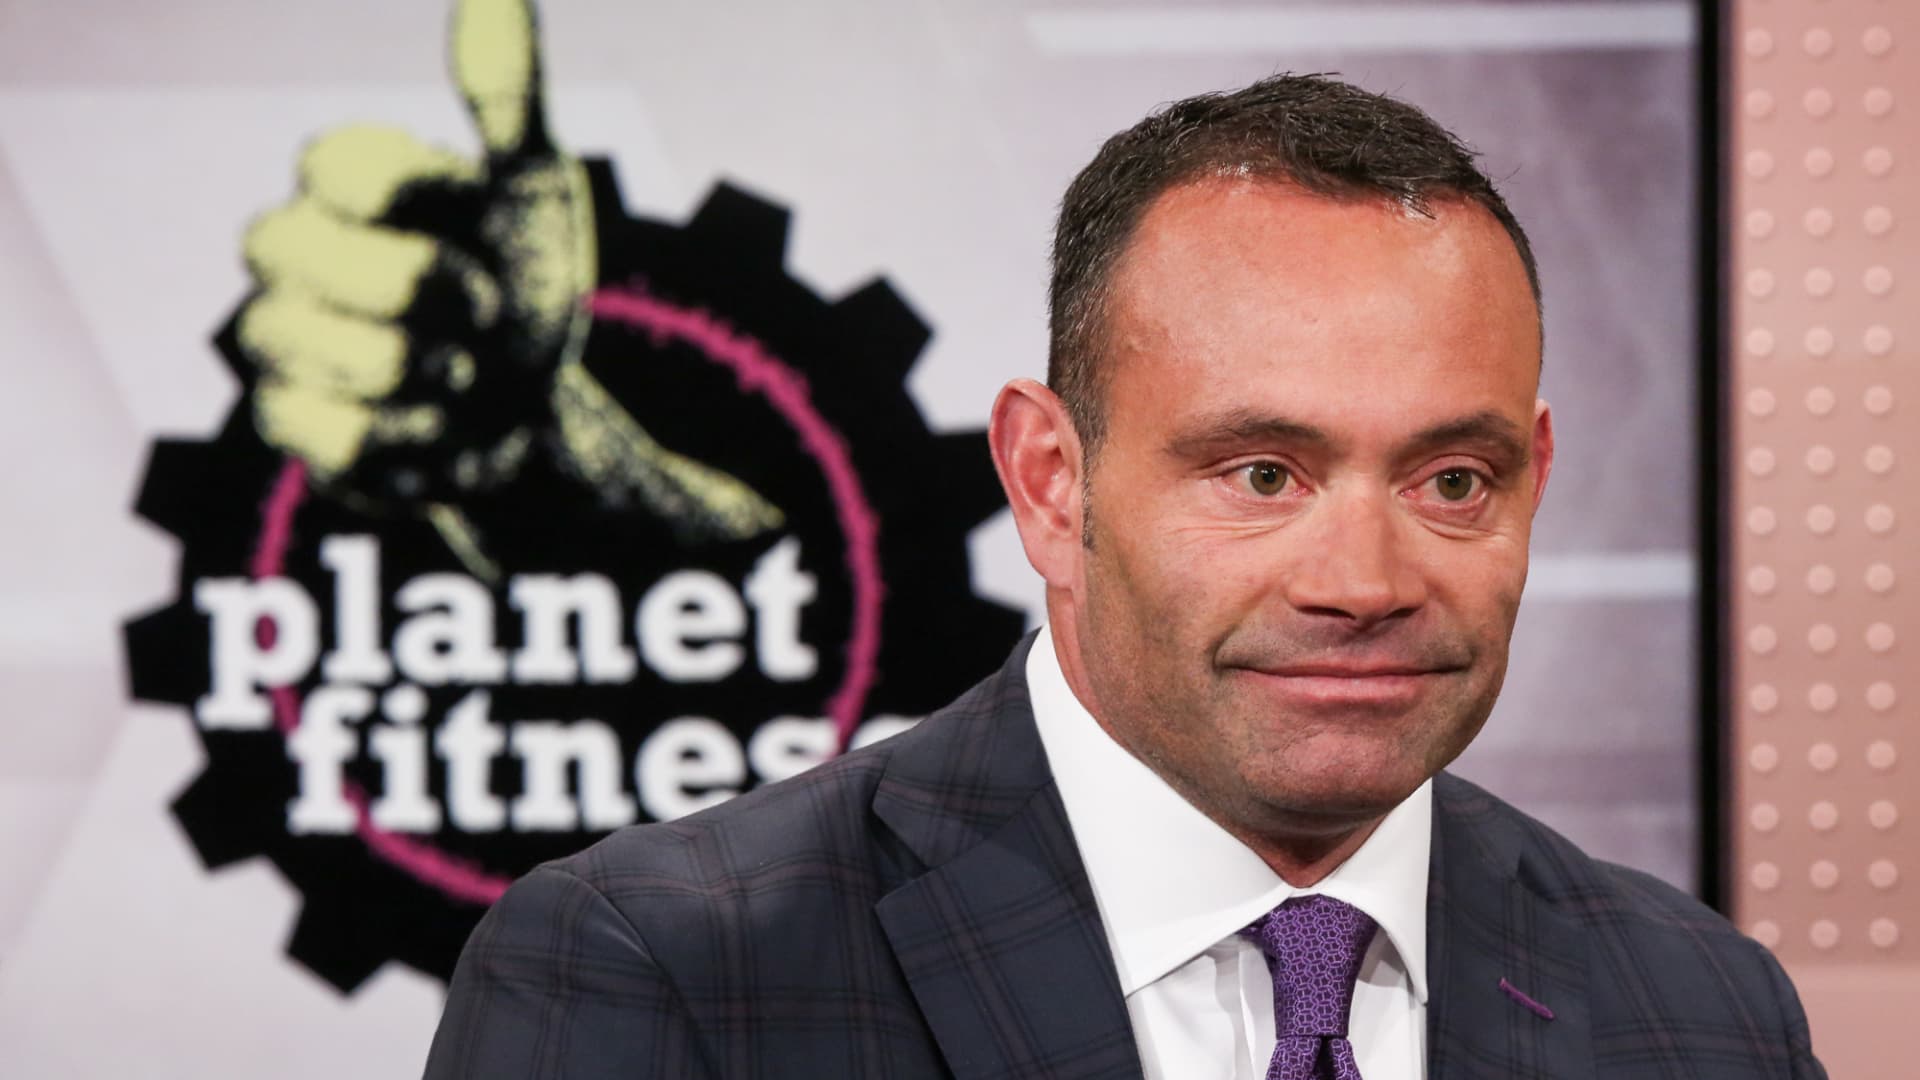 Planet Fitness shares sink after board ousts CEO